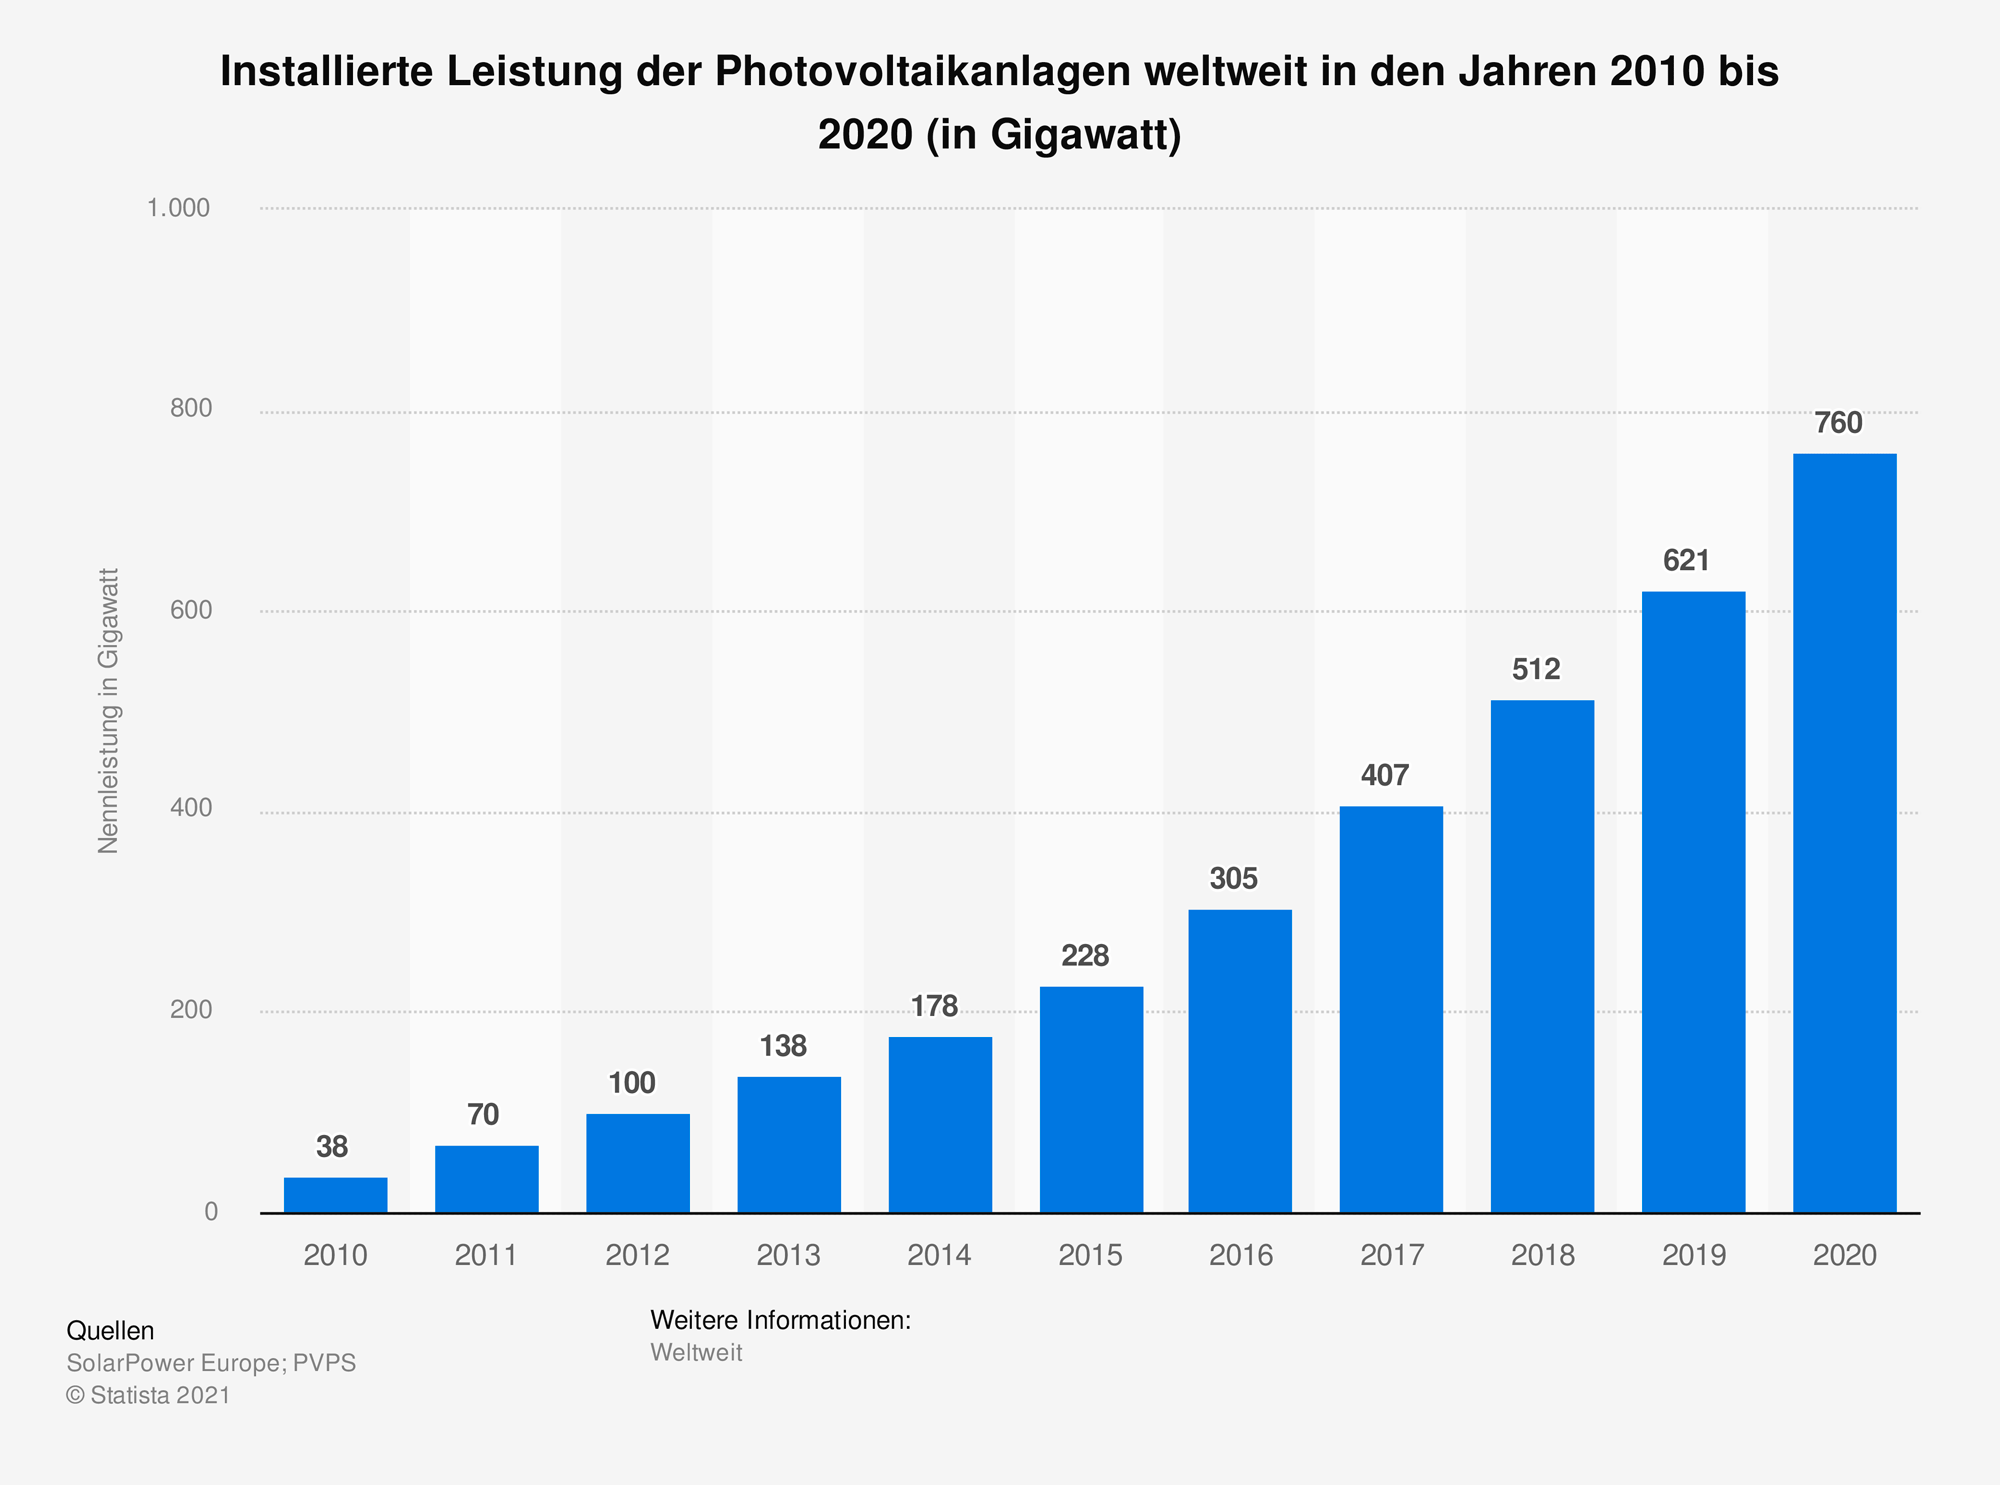 Installed capacity of photovoltaic systems worldwide from 2010 to 2020 (in gigawatts) Sources: SolarPower Europe; PVPS; © Statista 2021